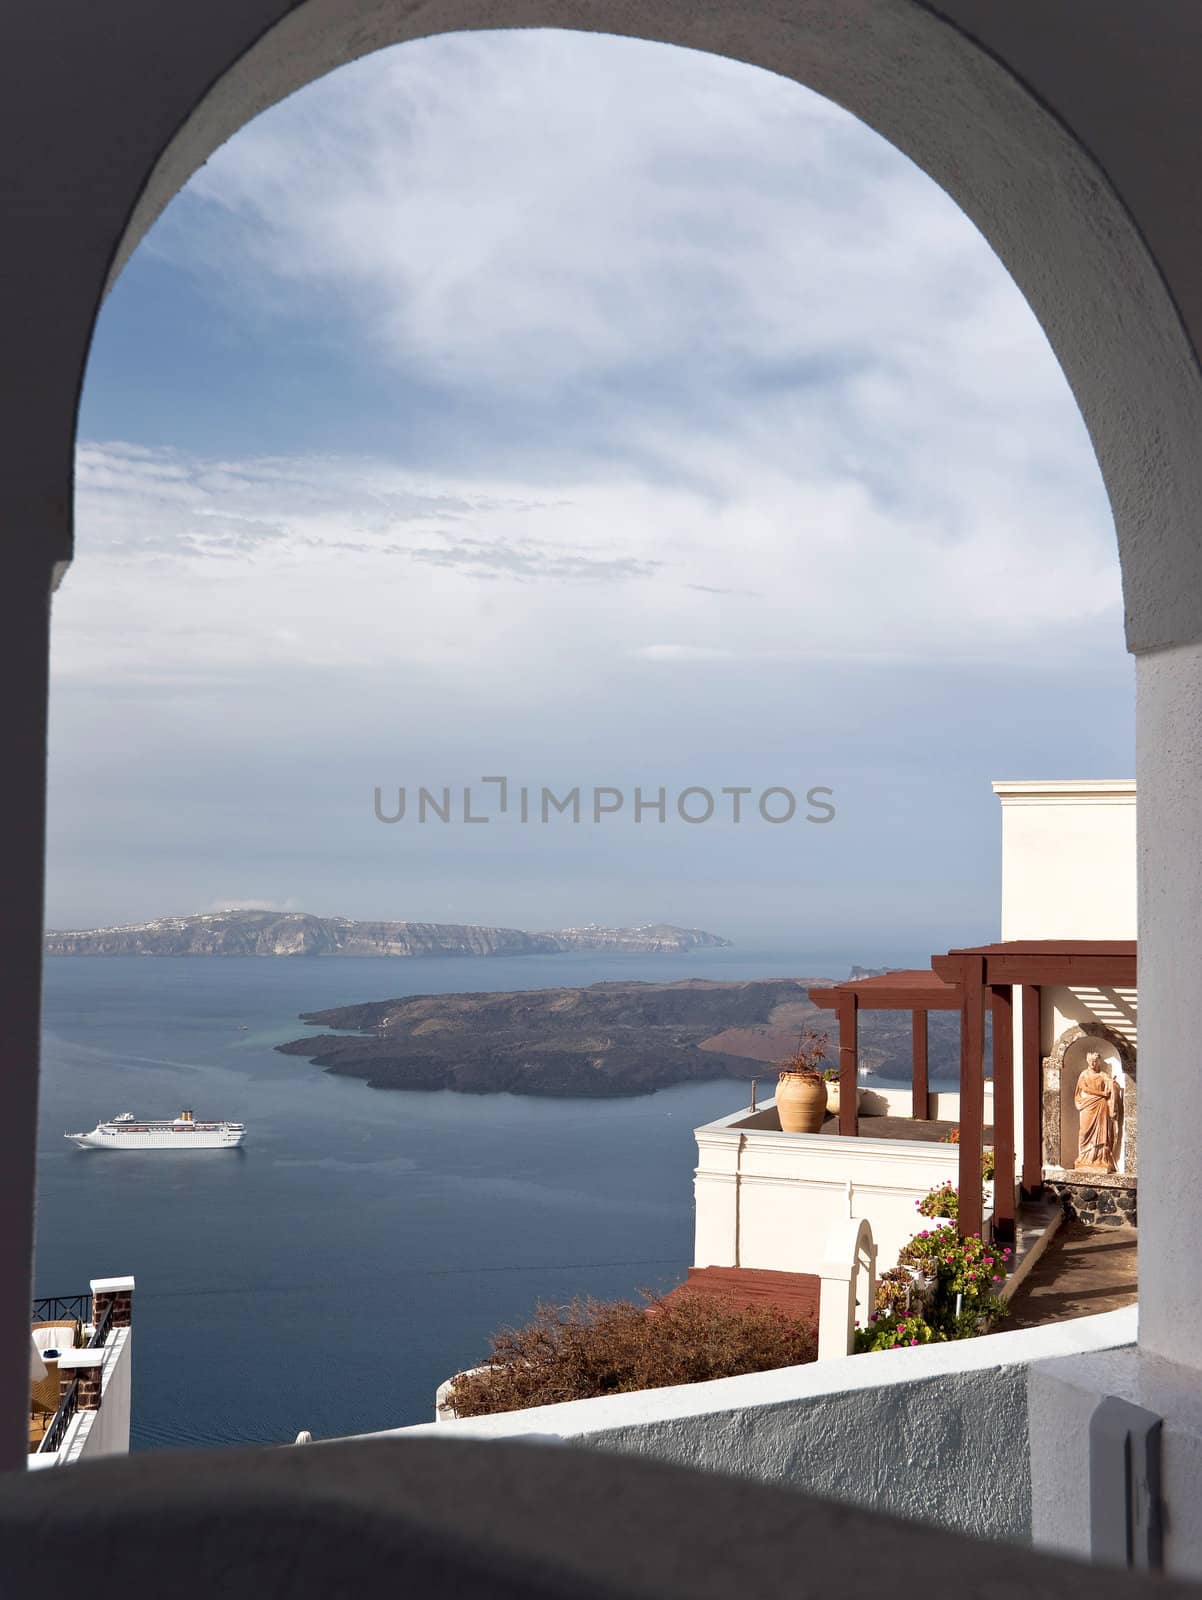 Caldera view in Santorini island with buildings and ship through the balcony arc